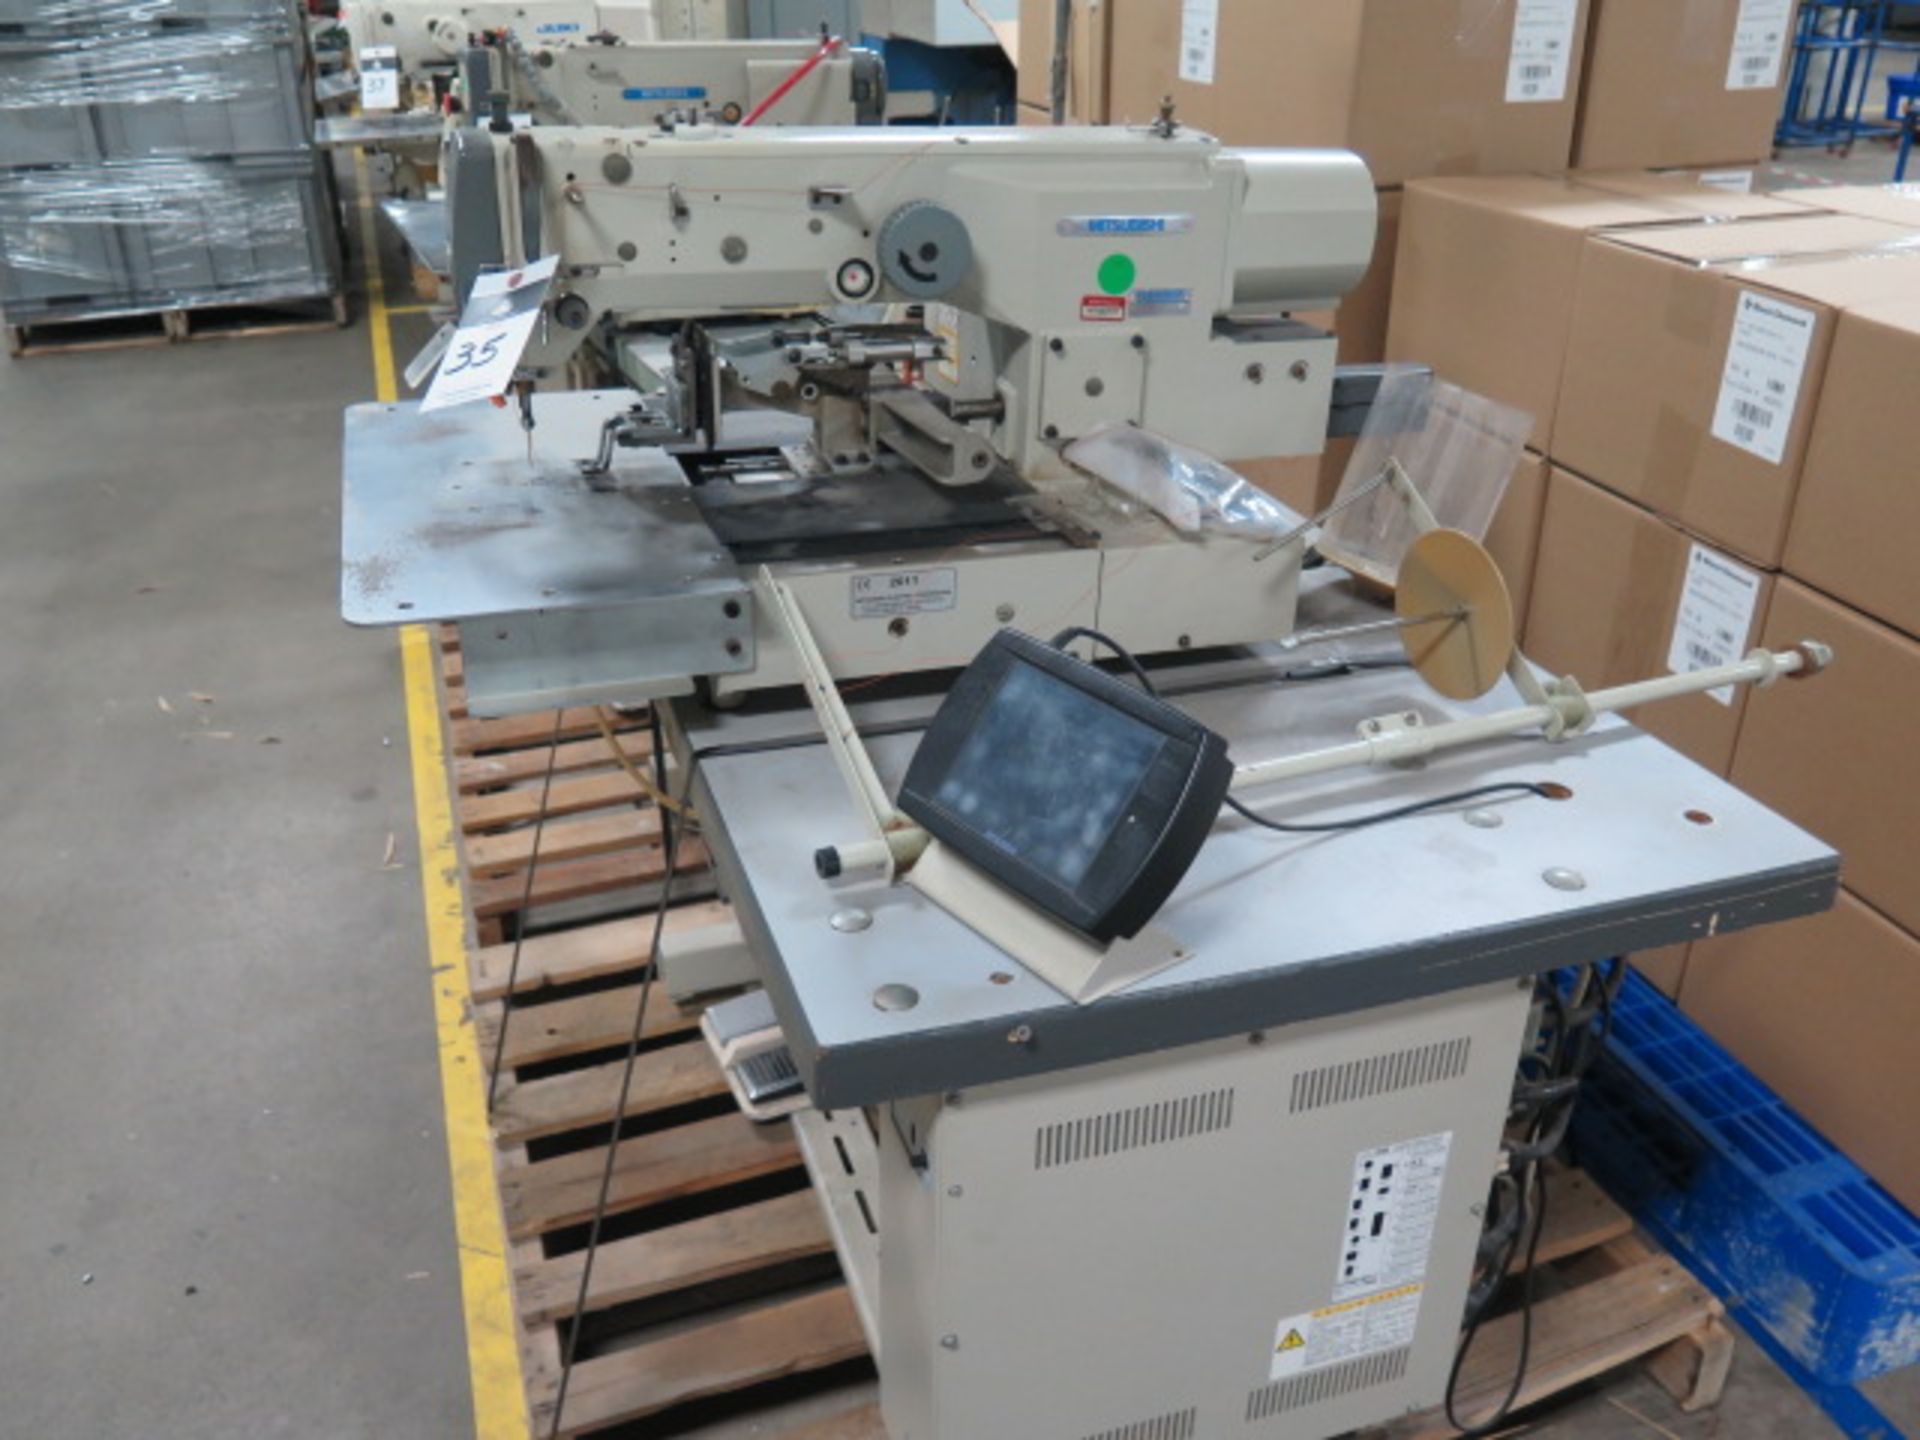 2011 Mitsubishi PLK-G2010R Industrial Sewing Machine s/n 111157 w/ Mits Touch Screen, SOLD AS IS - Image 2 of 11